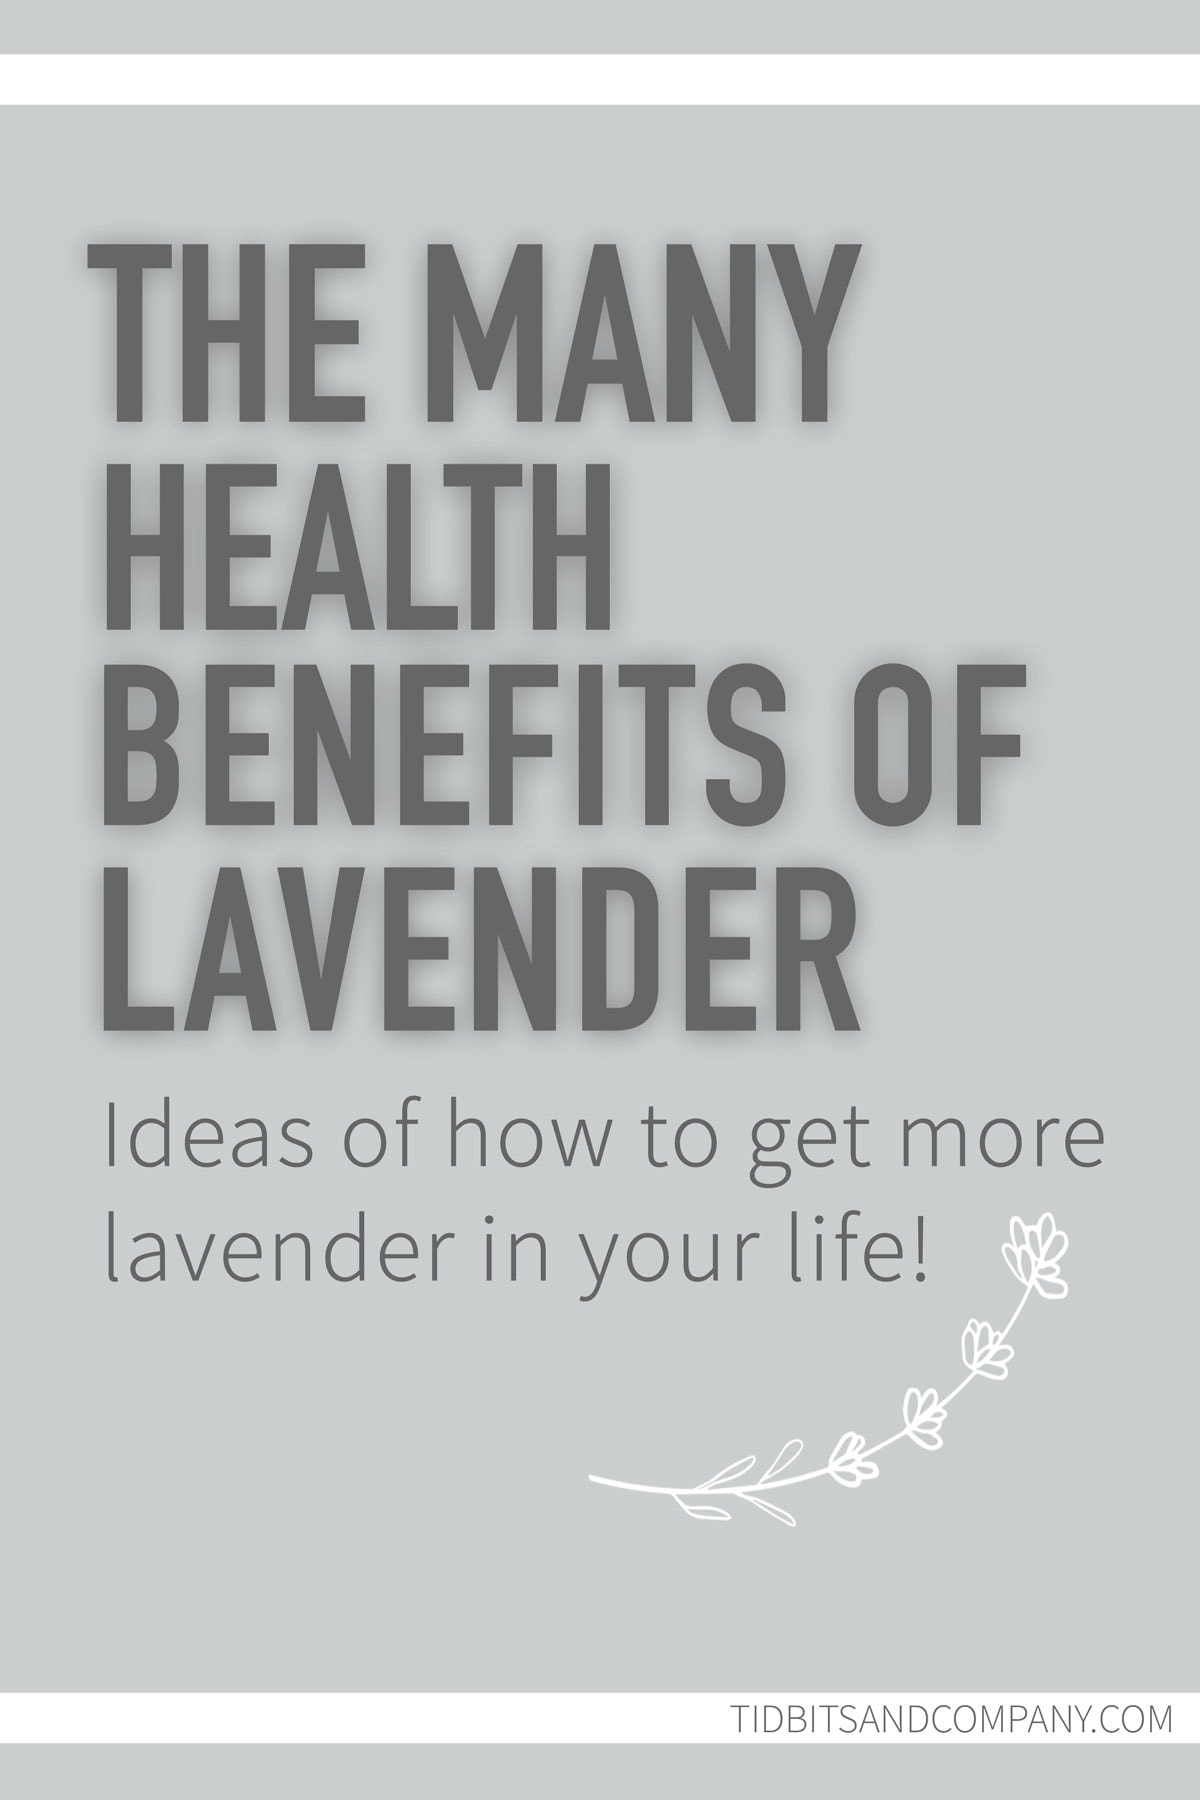 Text image of "the many health benefits of lavender"